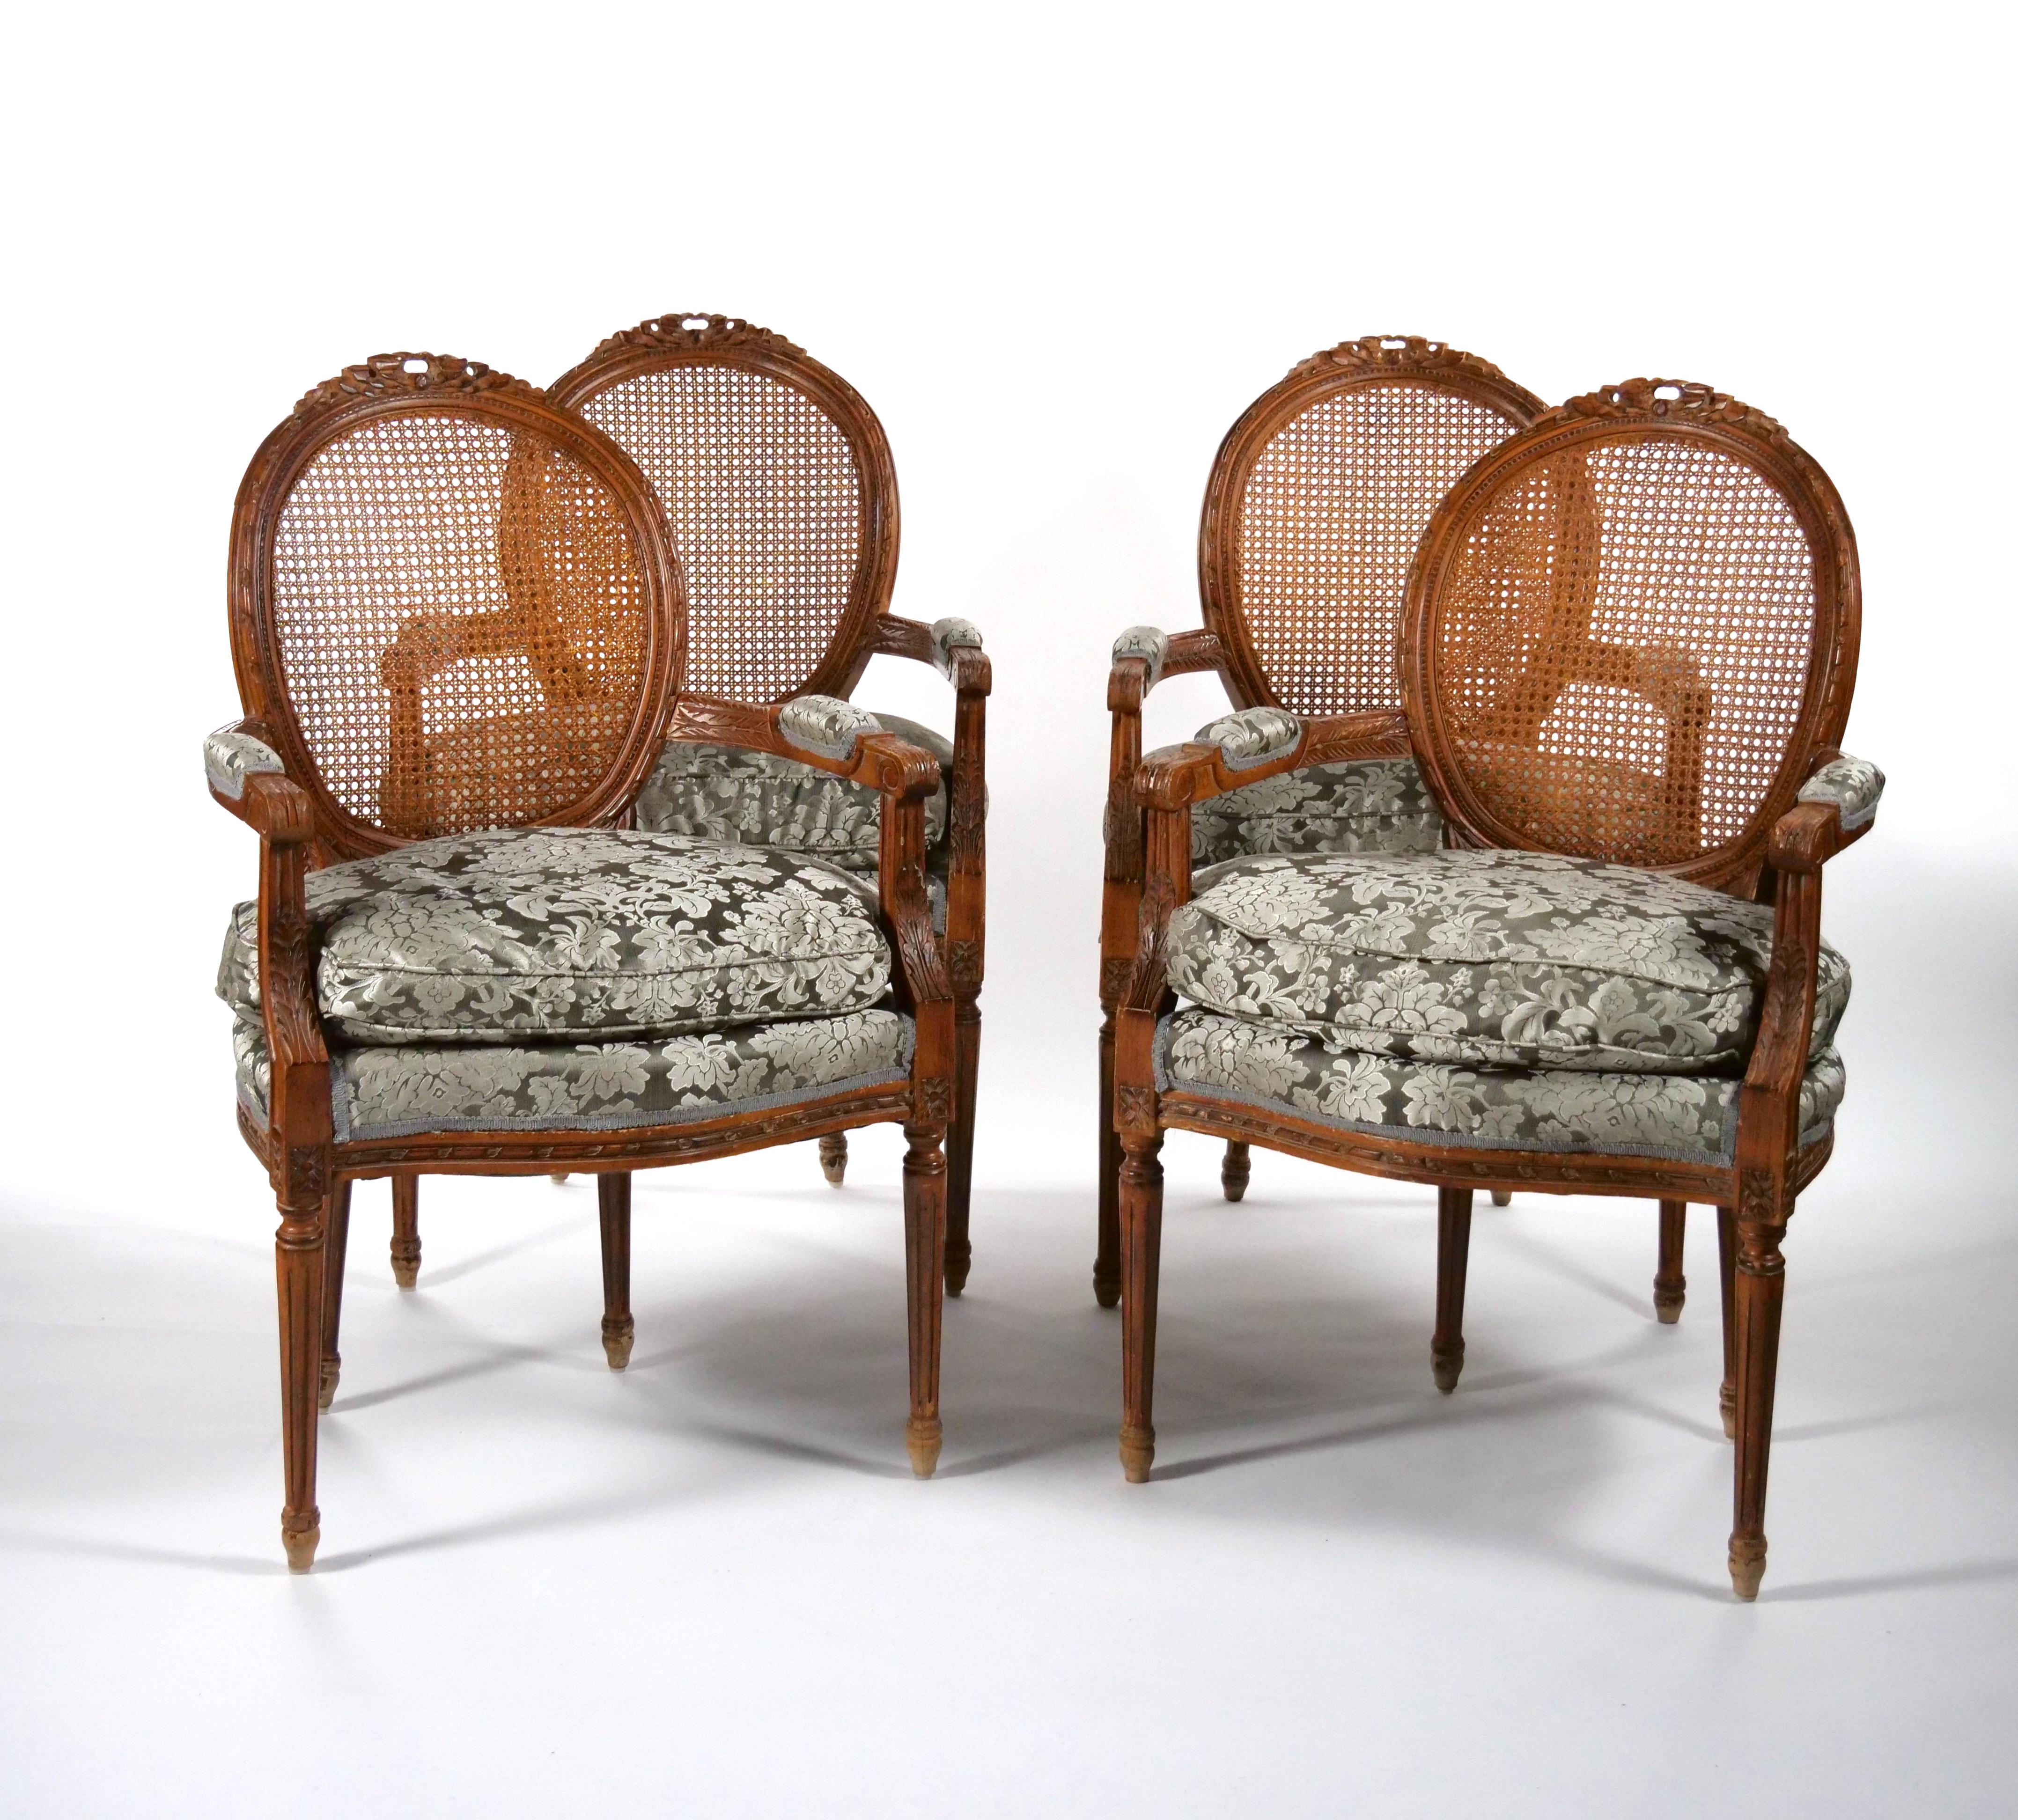 fine quality and beautifully hand carved and hand woven with wood frame floral decoration set of four armchair / bergere. Each armchair features a wood frame decorated with hand carved floral design , resting on four round carved feet decoration.